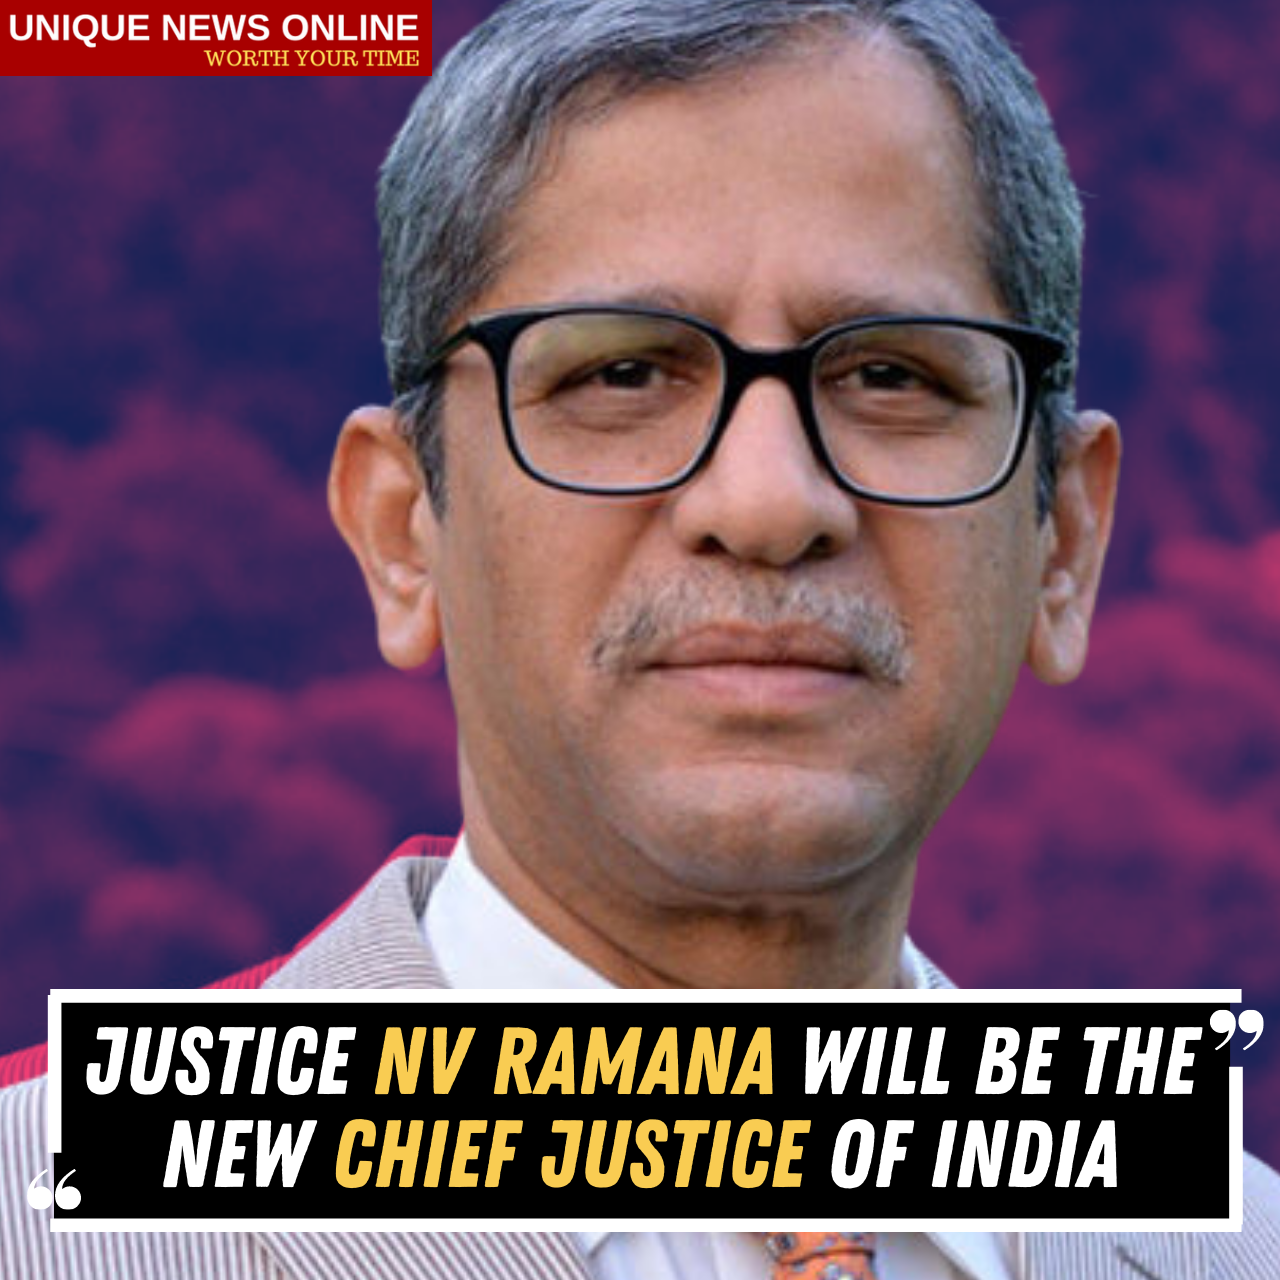 Justice NV Ramana will be the New Chief Justice of India